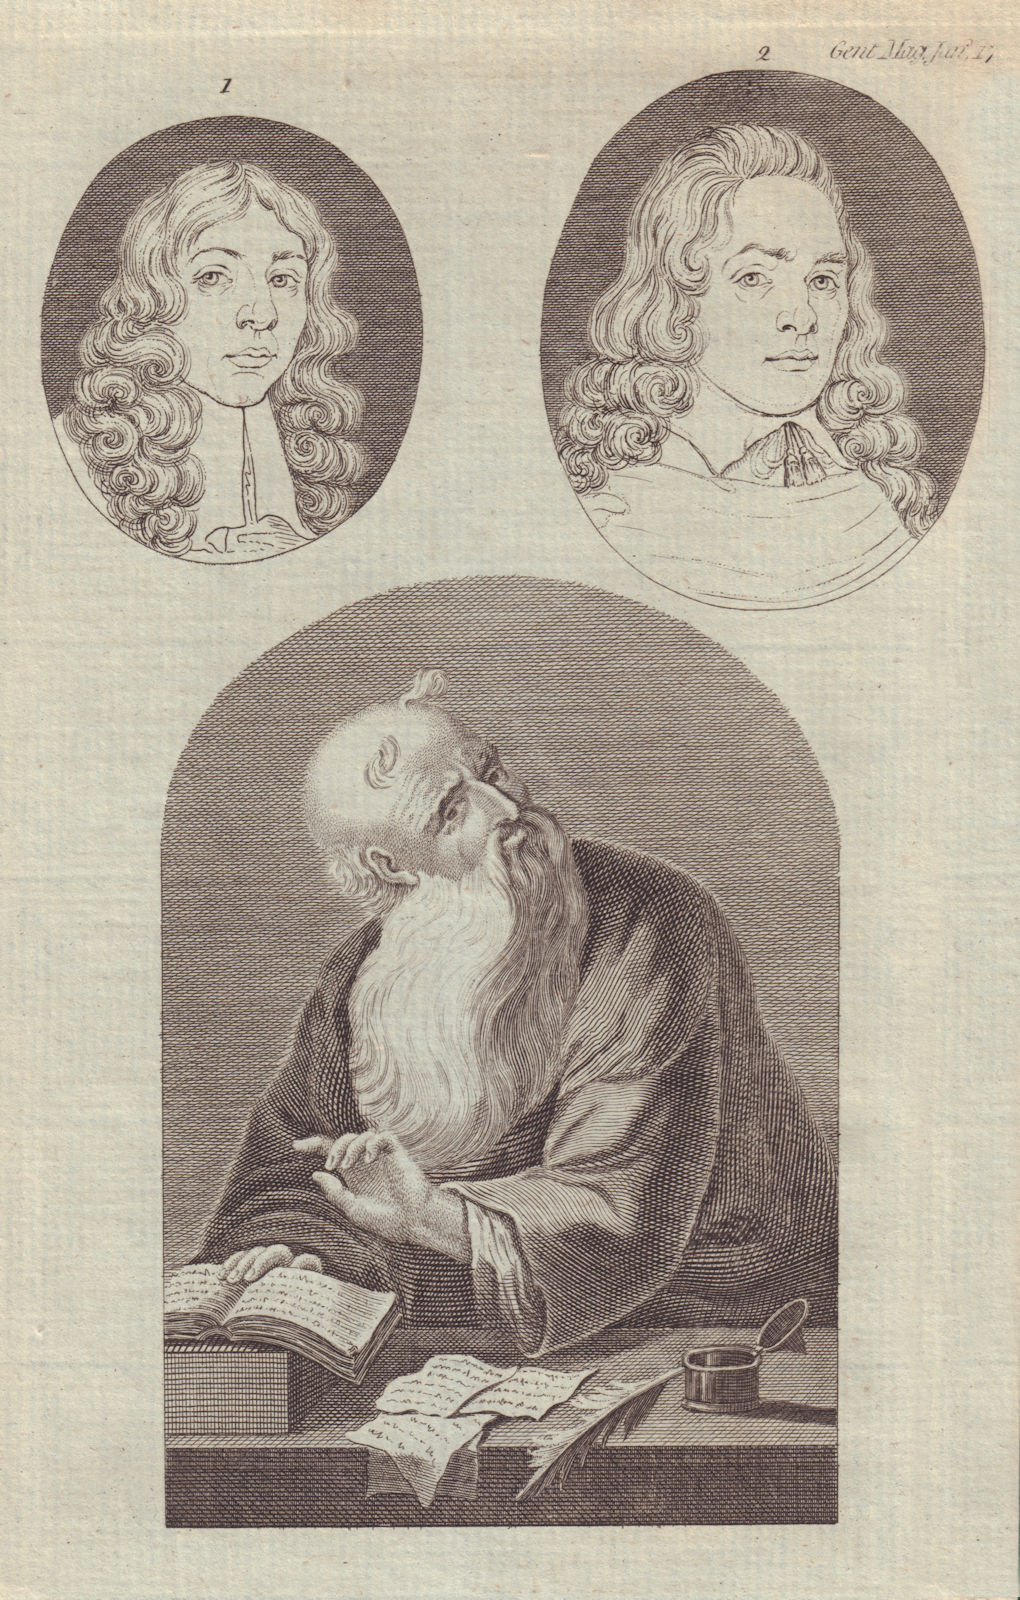 17th century portraits of unknown gentlemen. Old Man with a large beard 1784